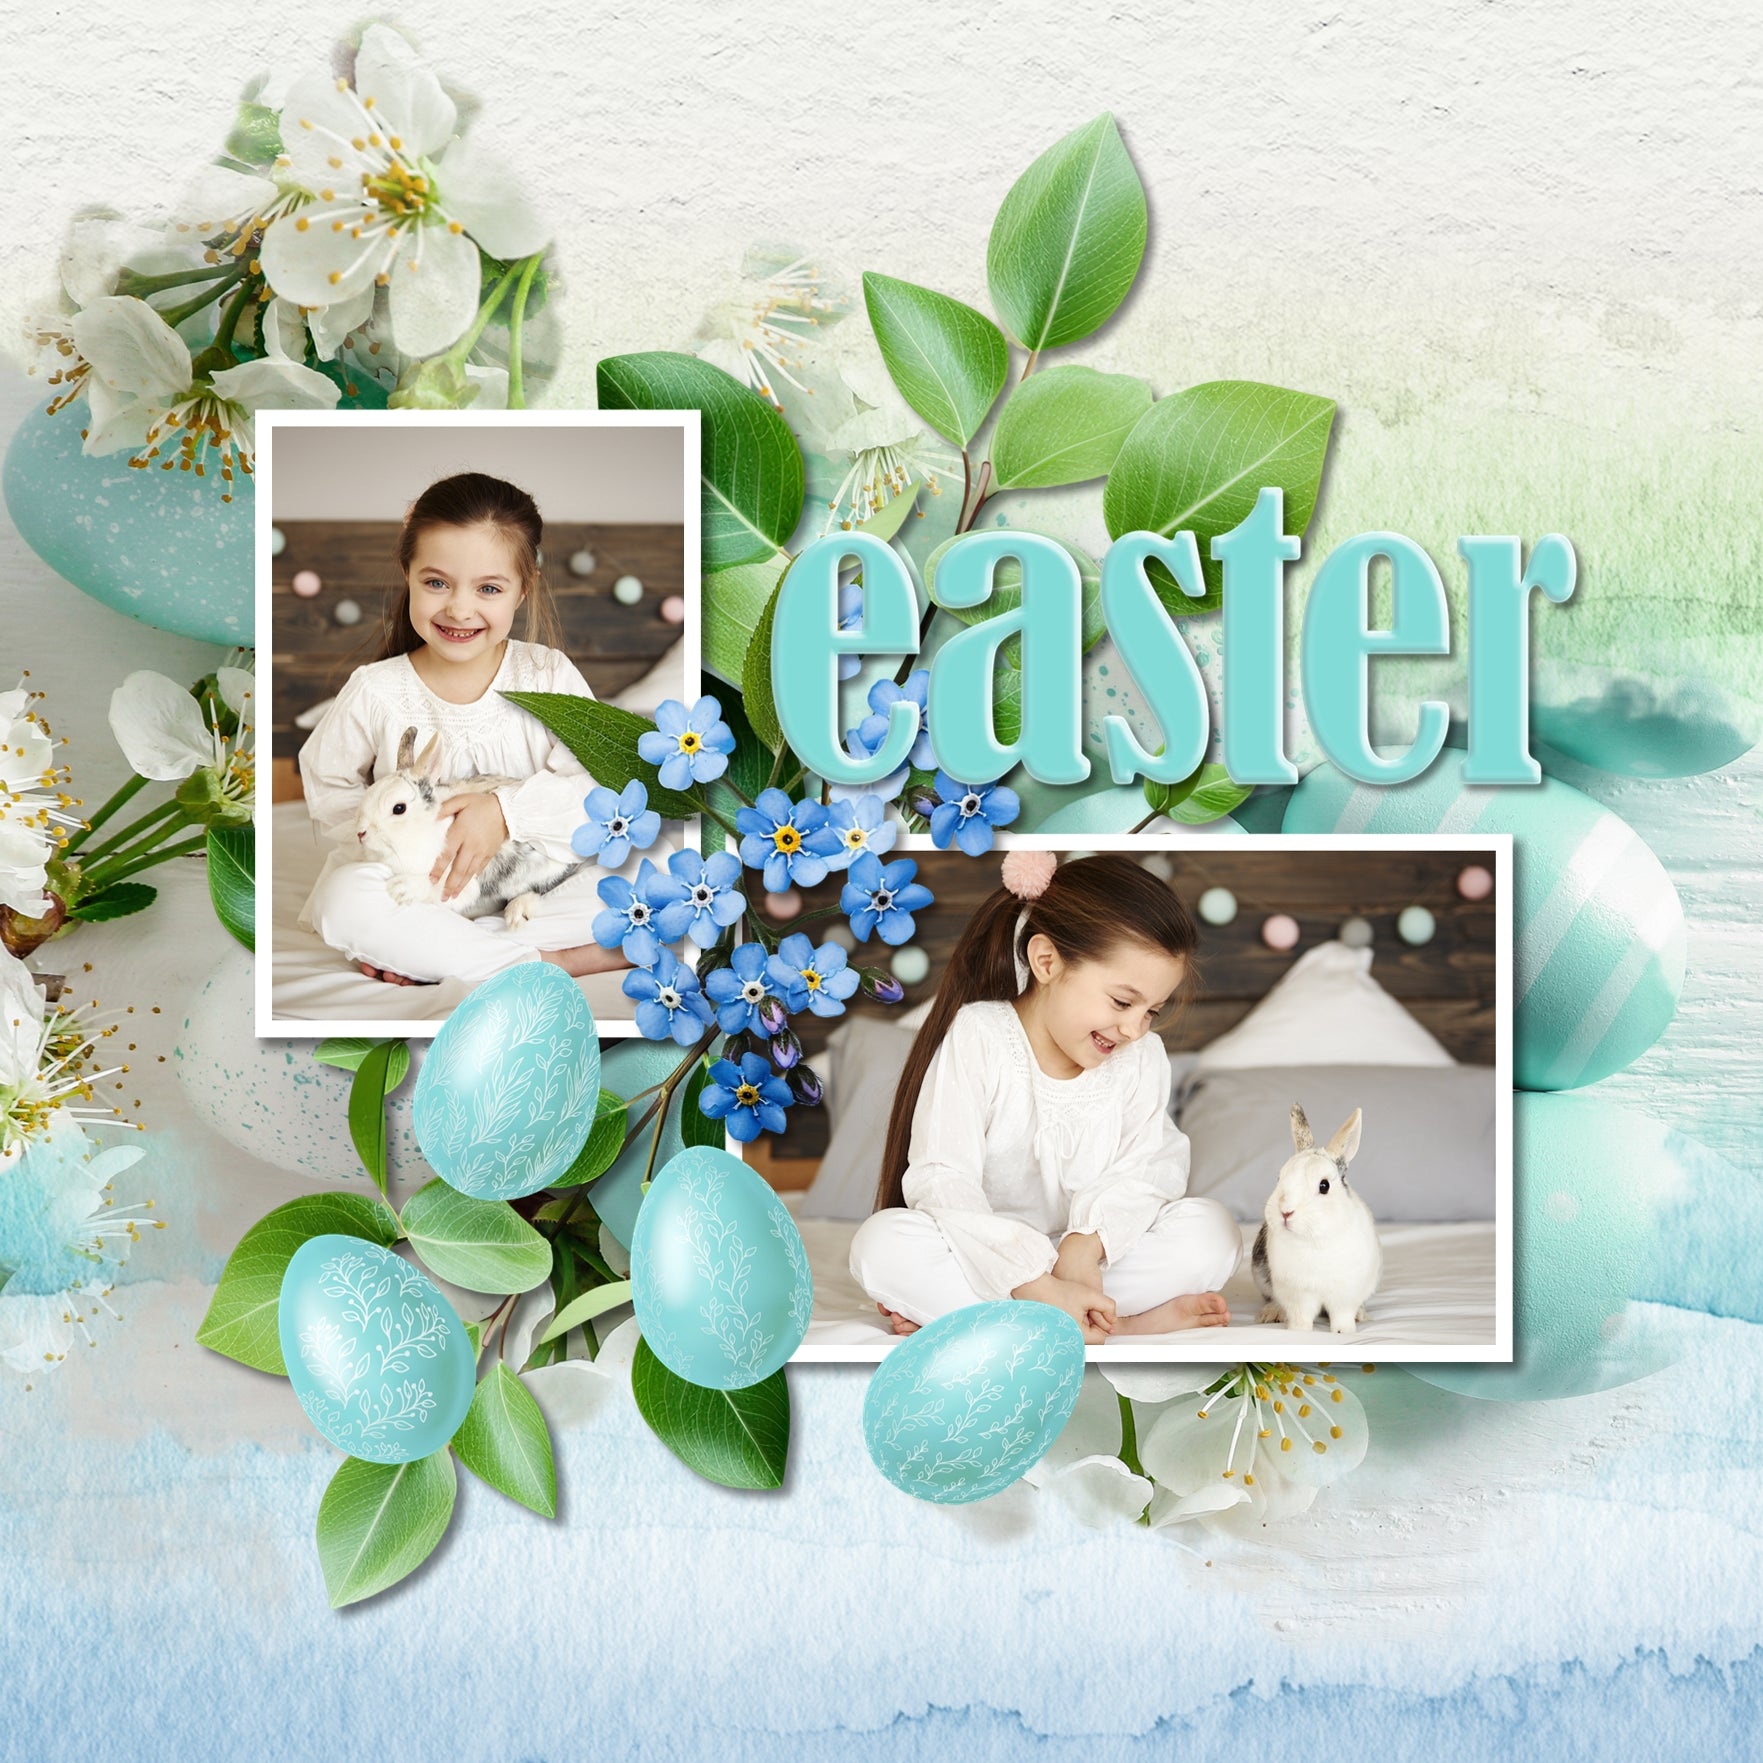 Create your own digital scrapbooking titles and word art with these stylish pastel alphabet letters, numbers, and punctuation by Lucky Girl Creative digital art that are perfect for any occasion and theme. Especially great for any Easter, spring, or baby pages. The Easter in Spring Alpha Bundle consists of a full set of digital art uppercase letters A-Z, lowercase letters a-z, numbers 0-9, and most punctuation marks in pastel yellow, purple, pink, and blue.